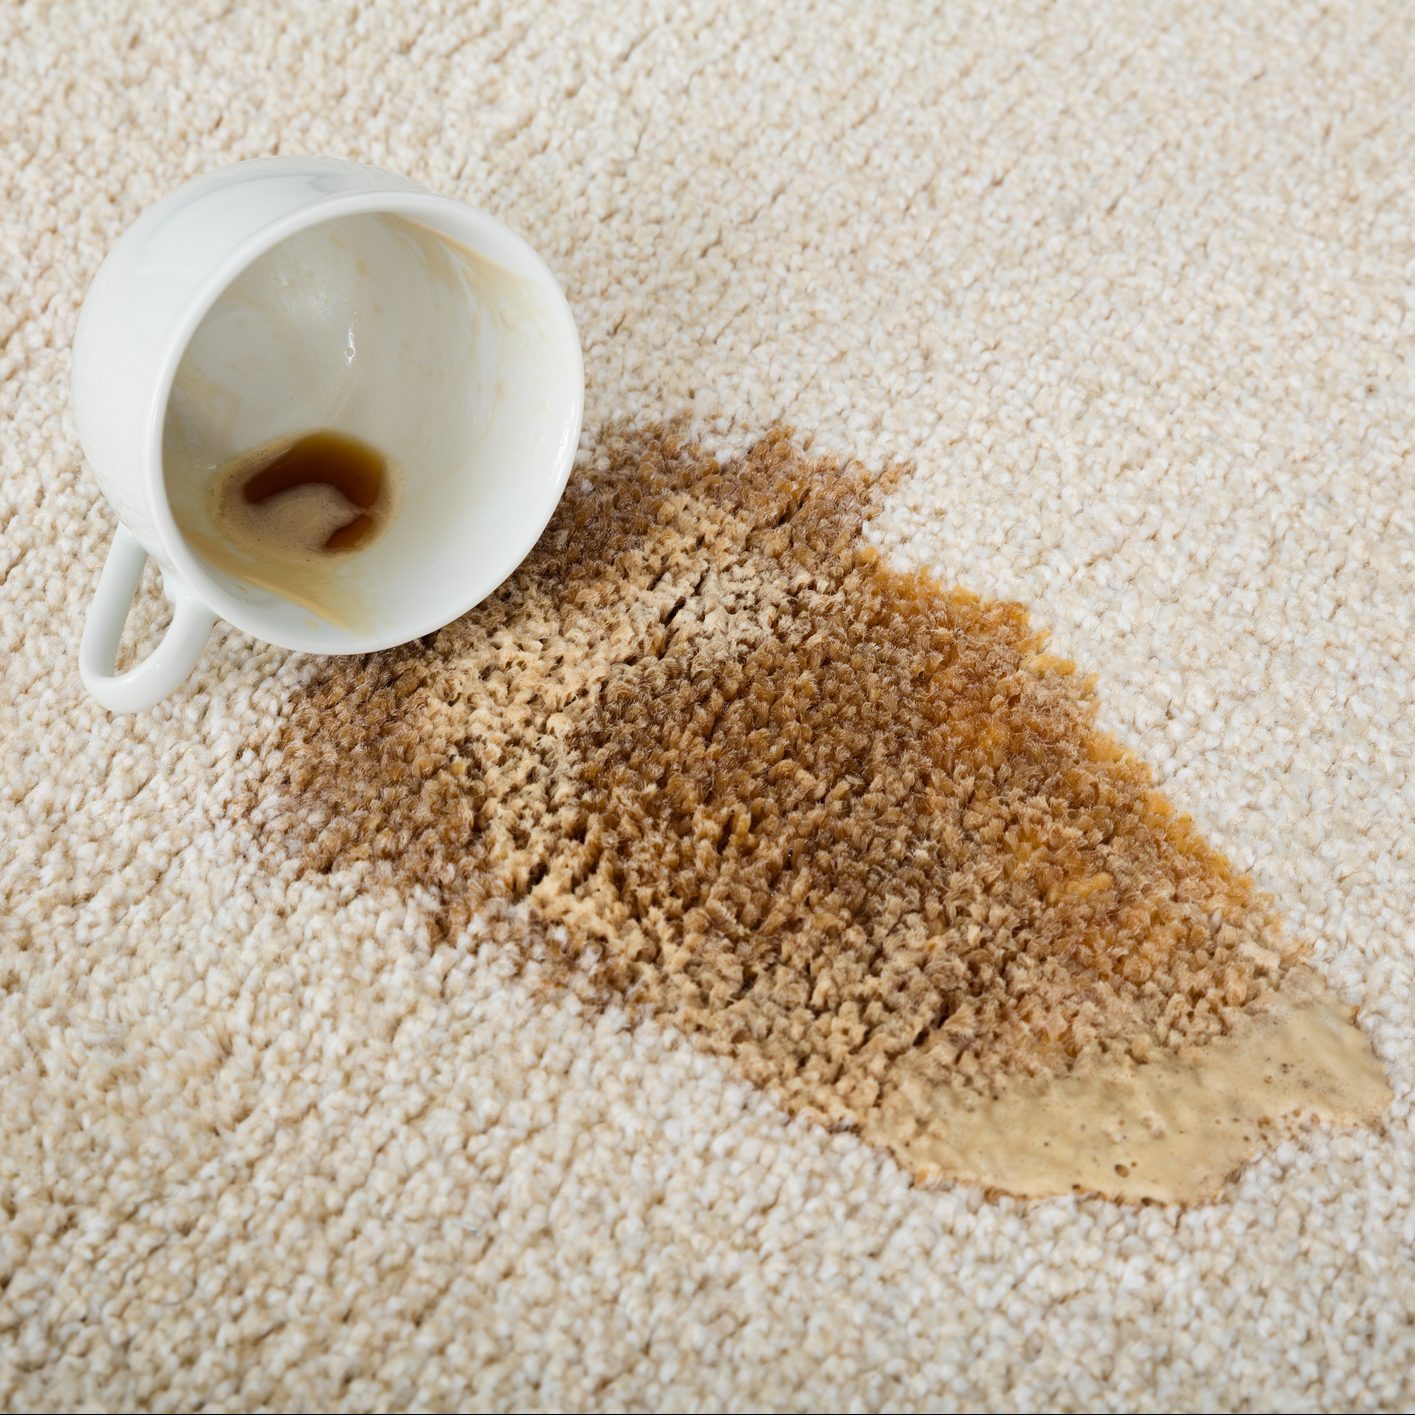 Coffee Spilling From Cup On Carpet